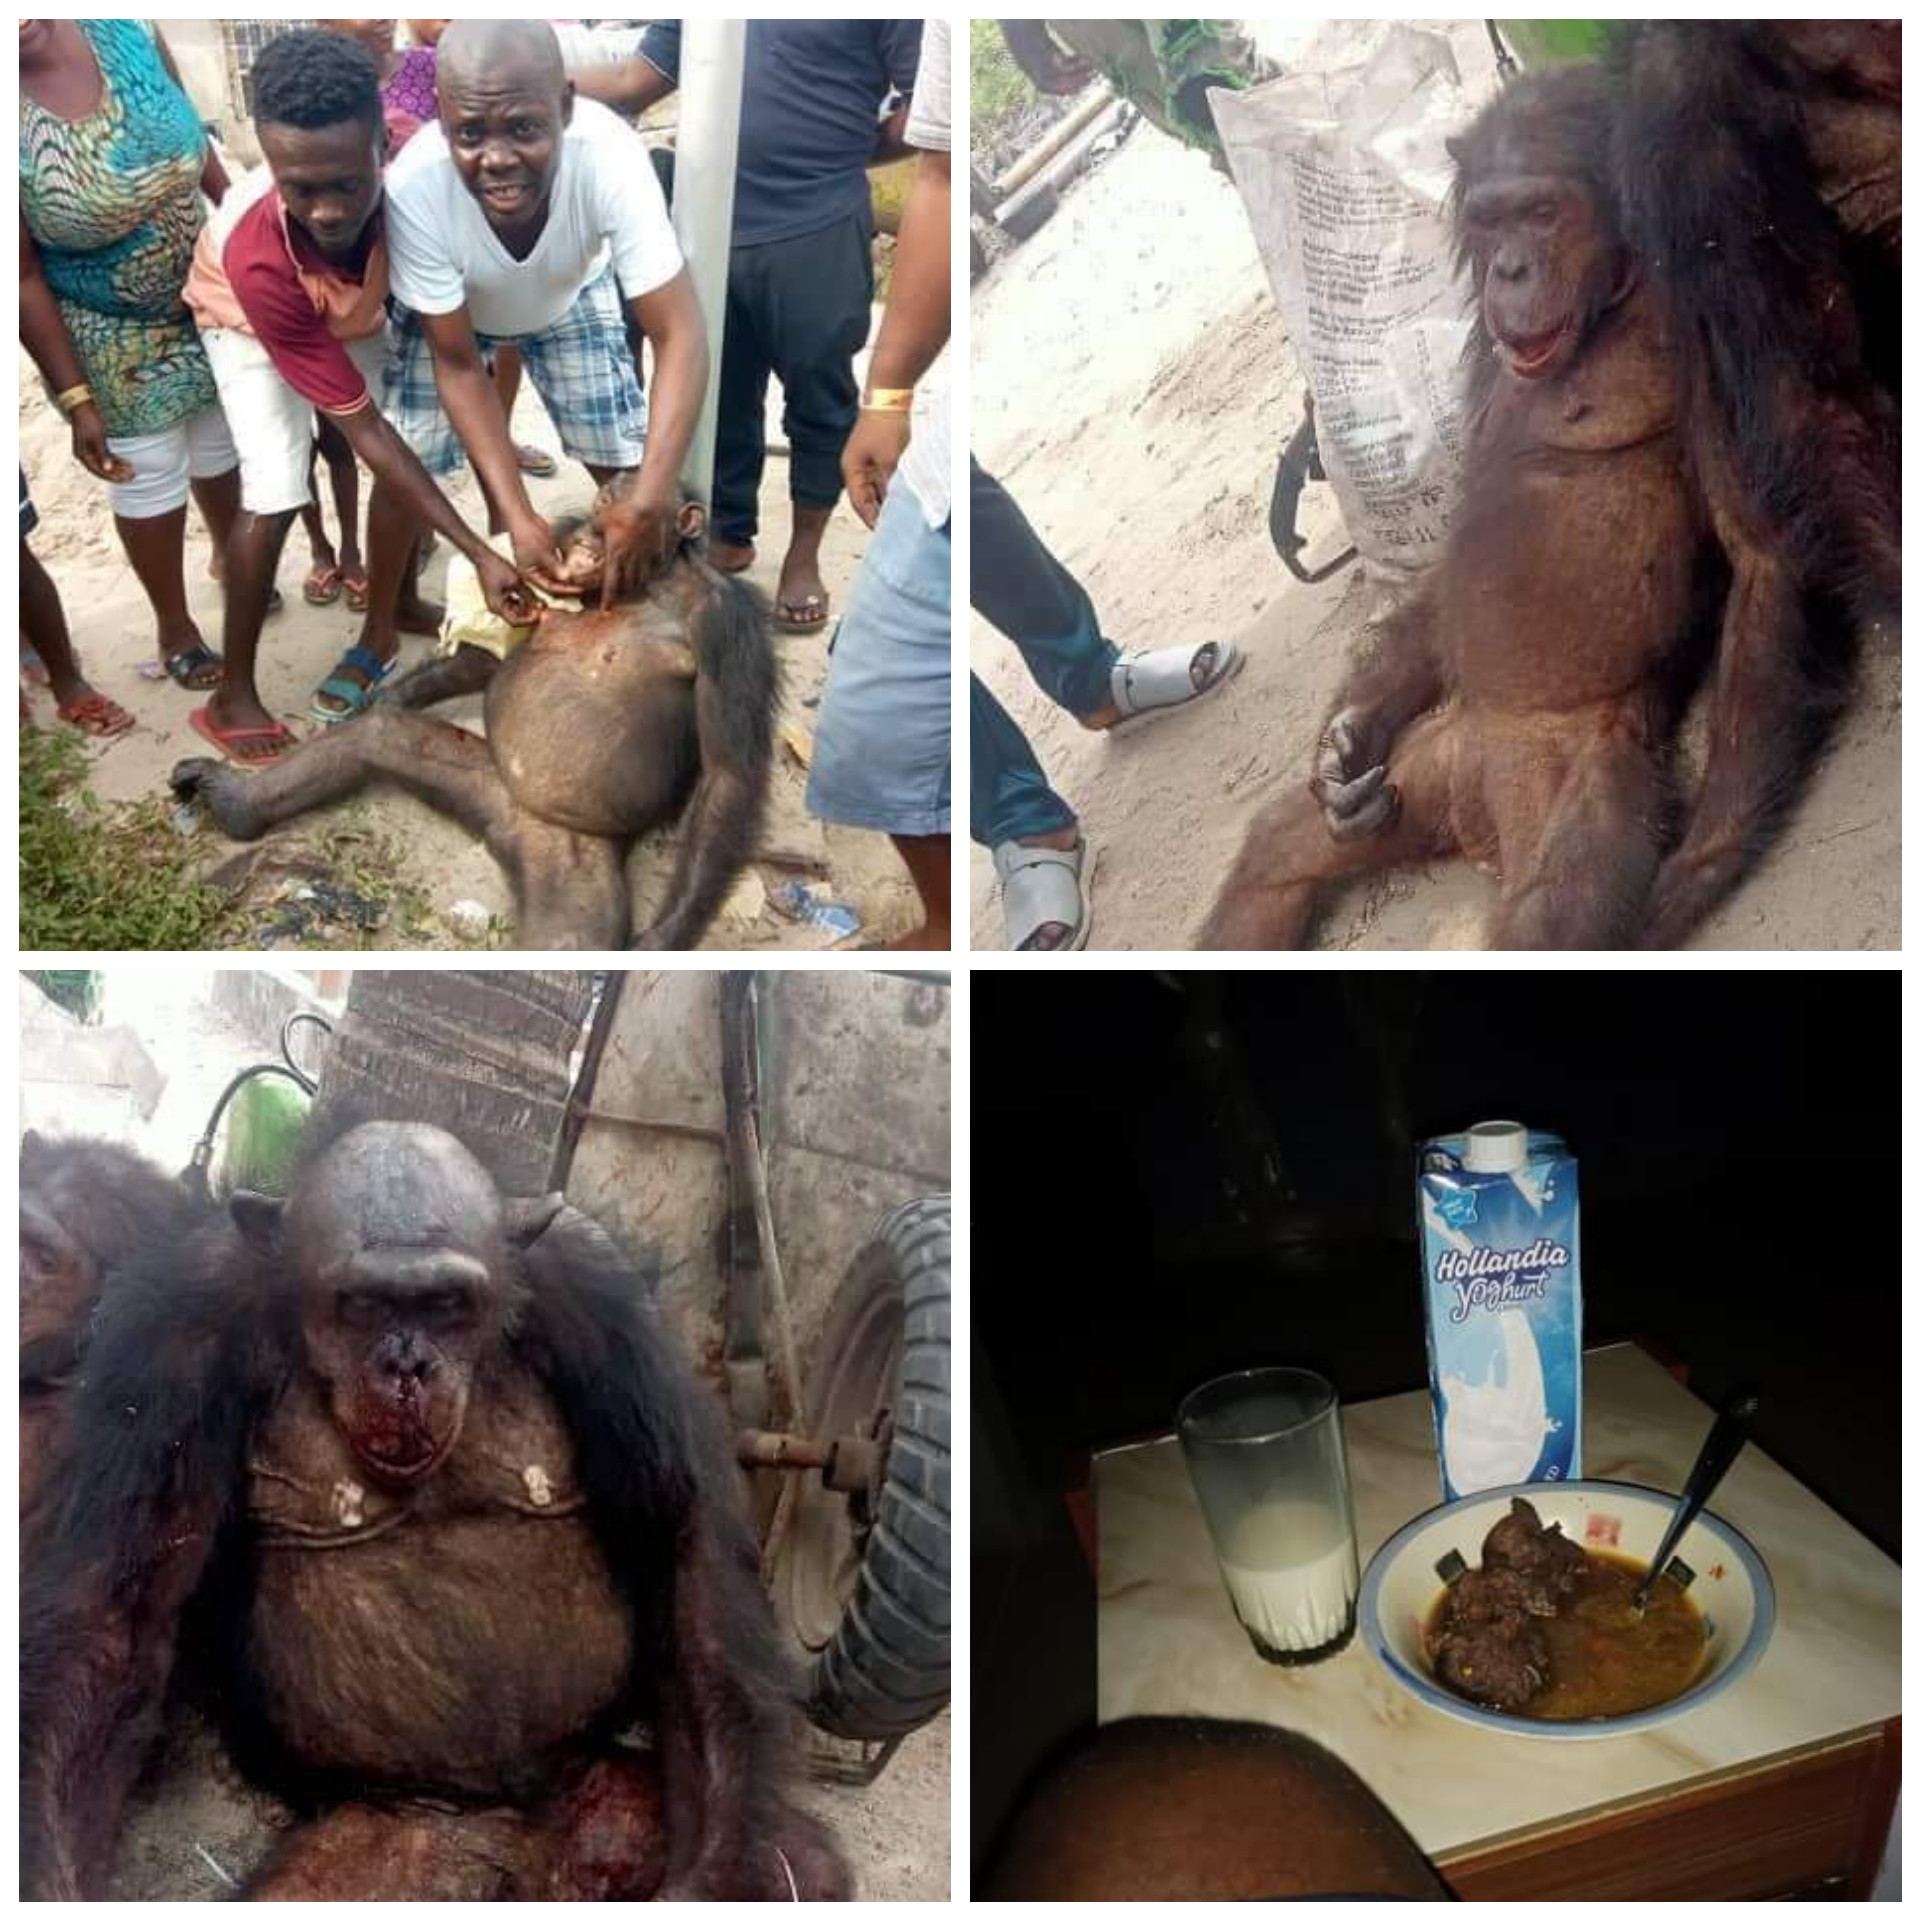 "Eating endangered species into extinction" - Reactions as hunters, locals kill chimpanzee and use meat to make pepper soup in Bayelsa community (video)